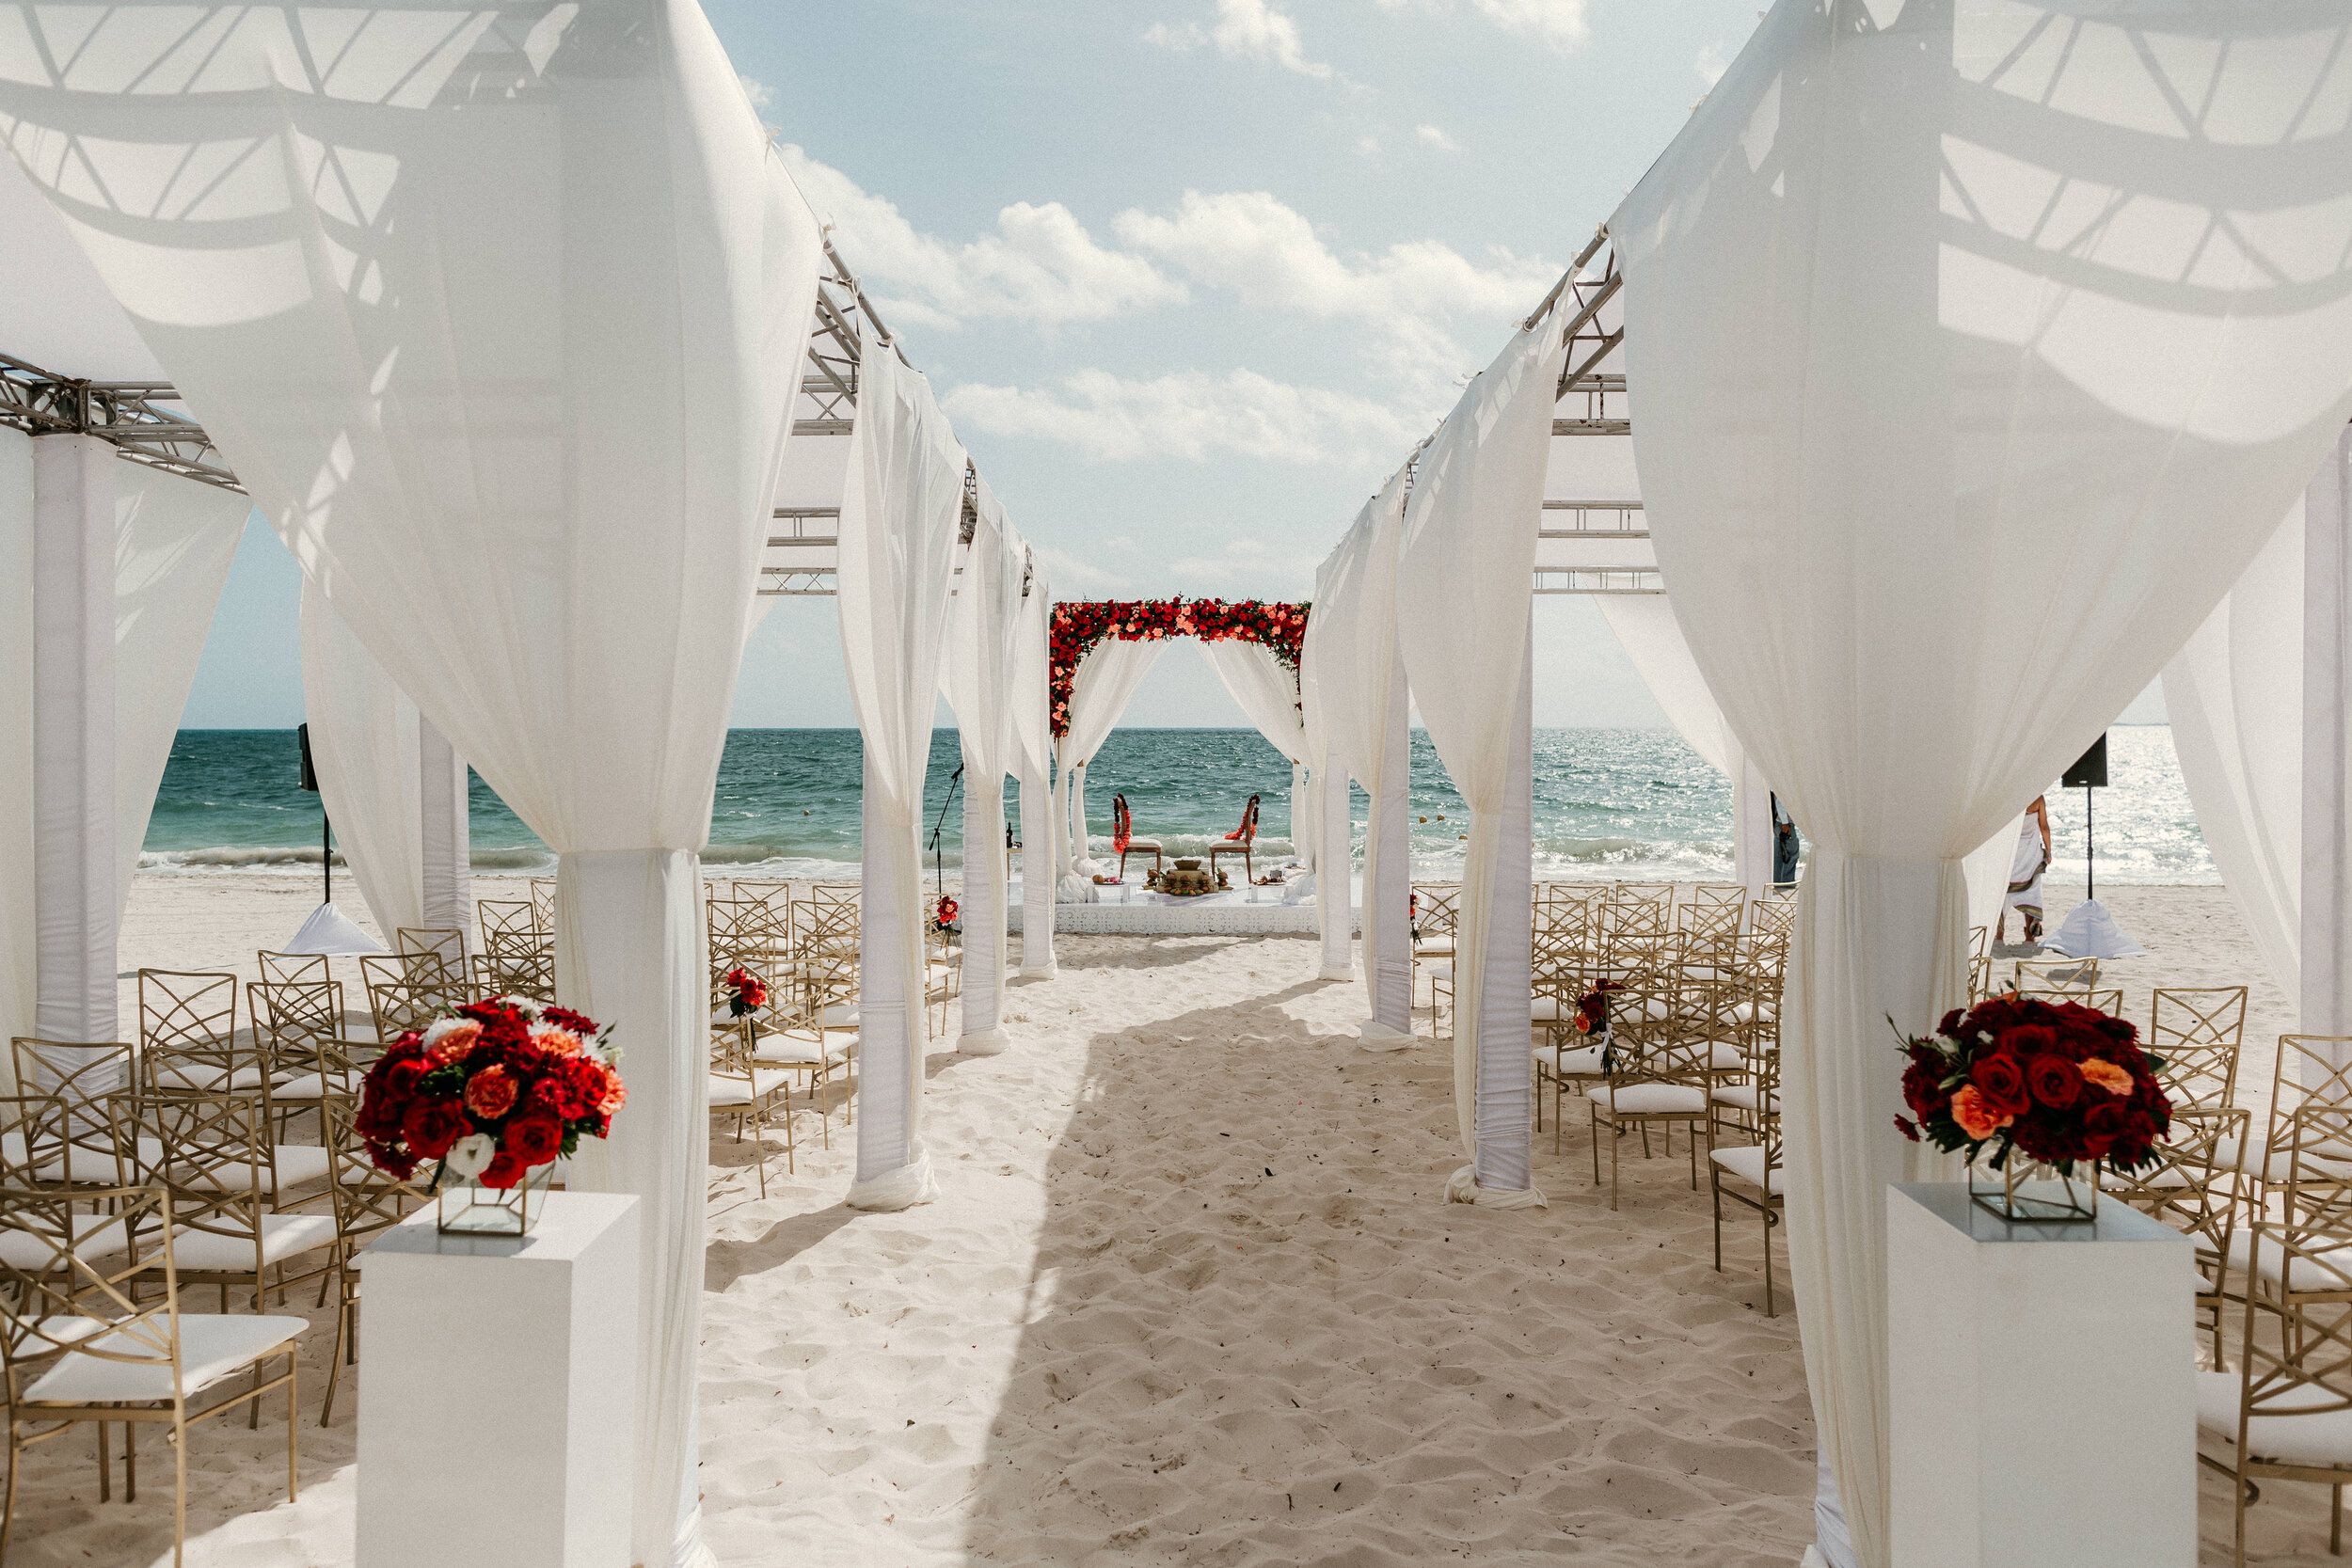 How Much Does a 100 Person Destination Wedding Cost?